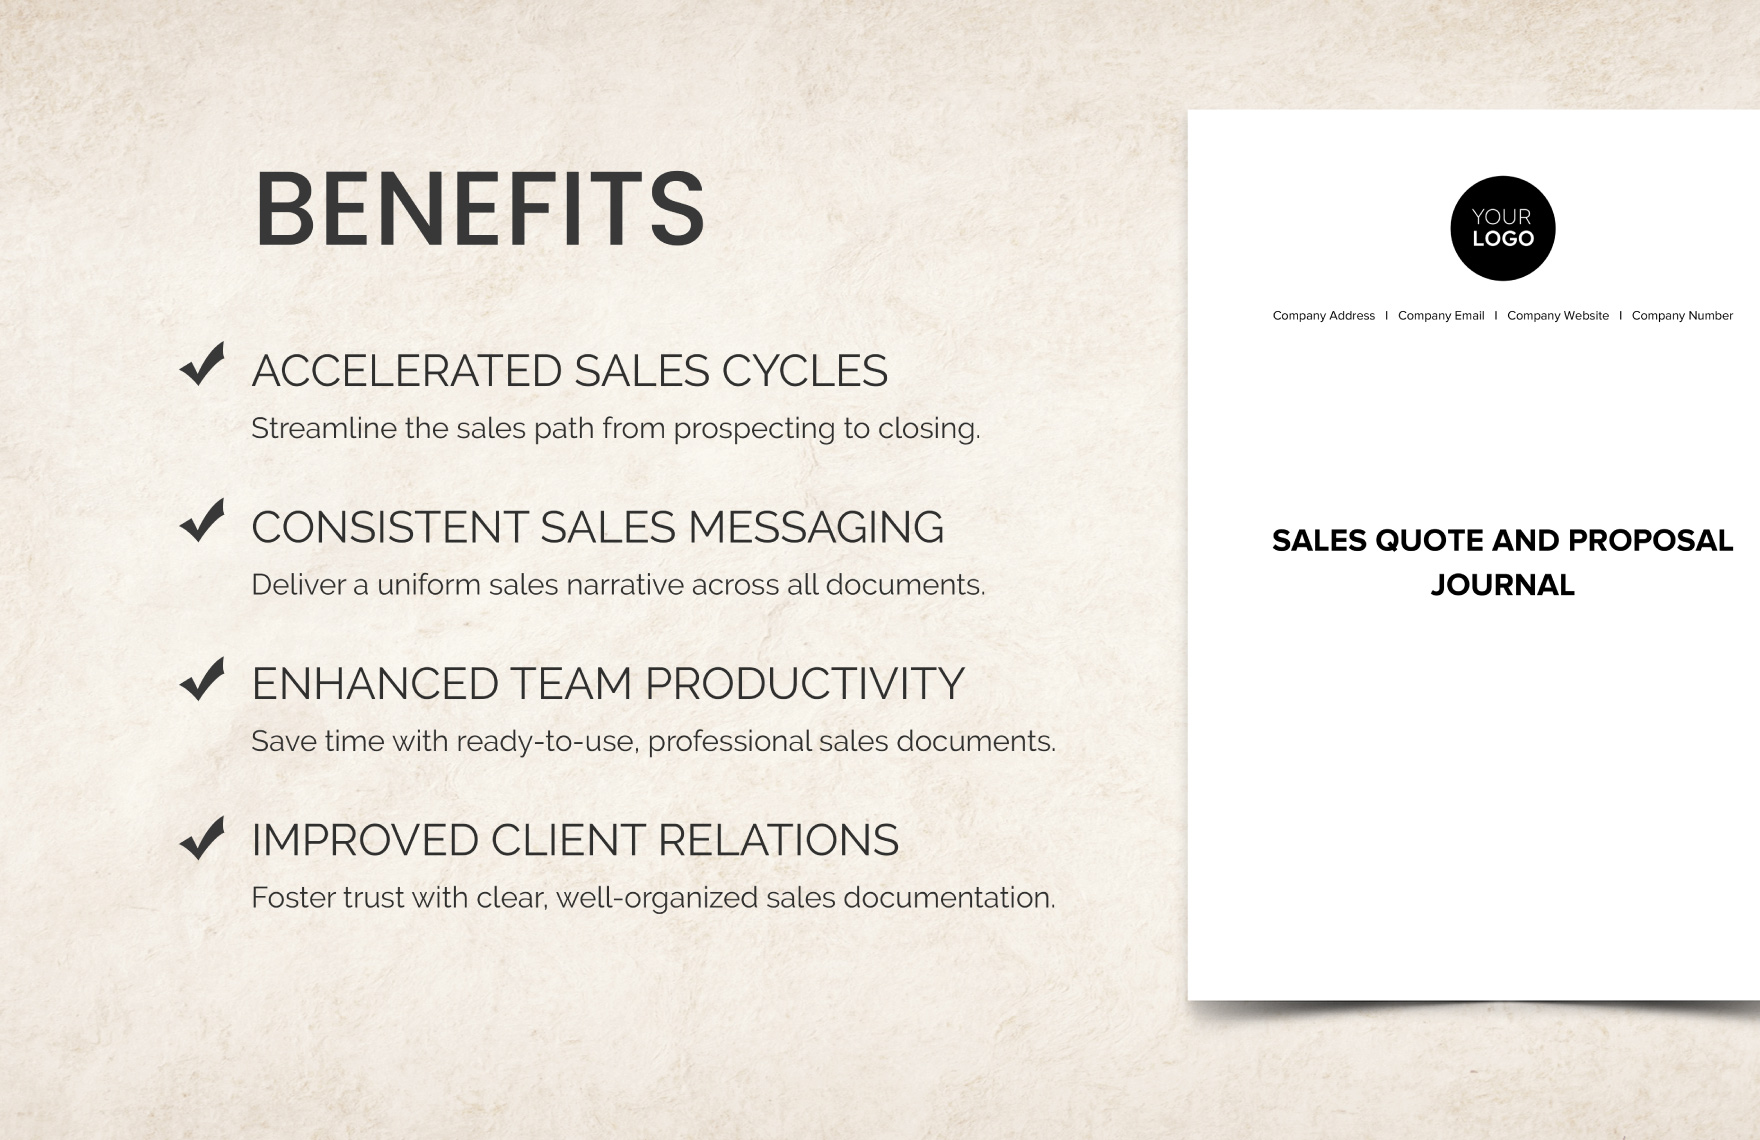 Sales Quote and Proposal Journal Template